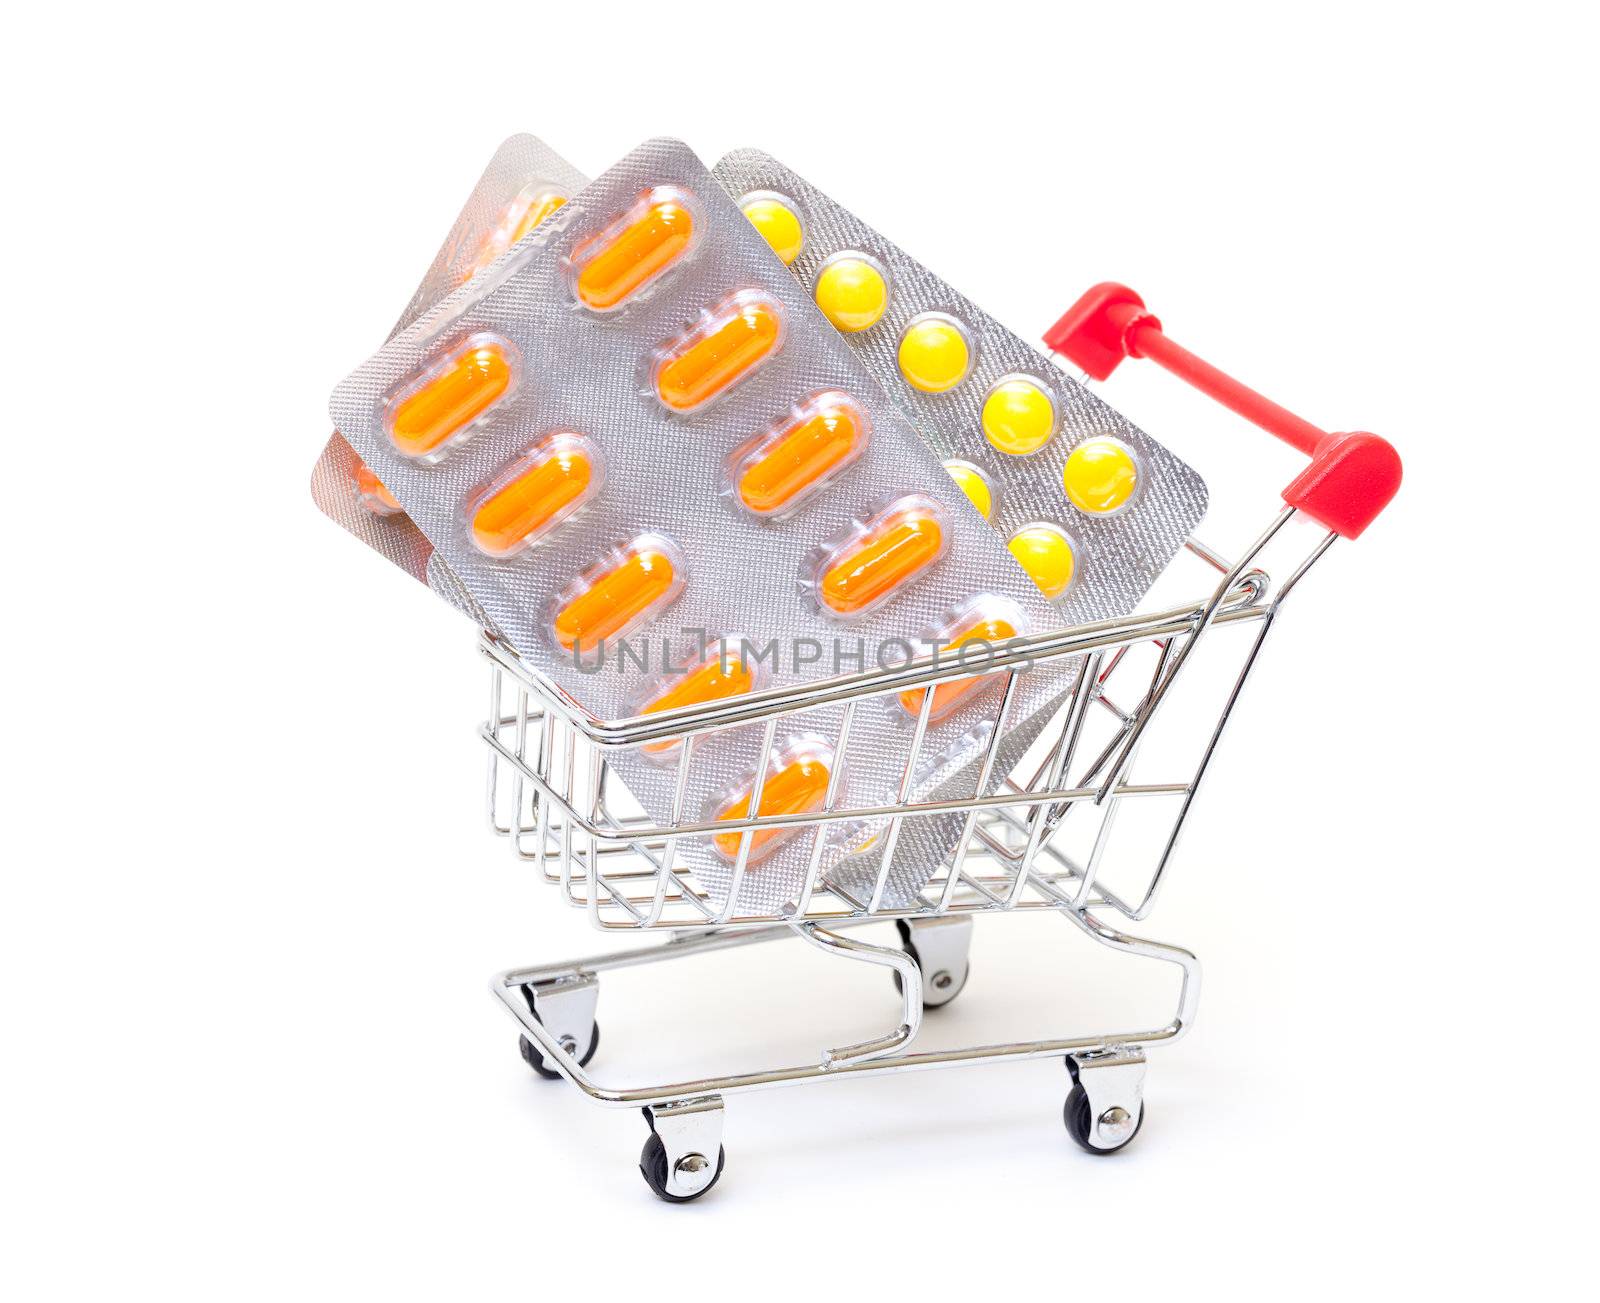 Multicolored pills packs in shopping cart, on white background